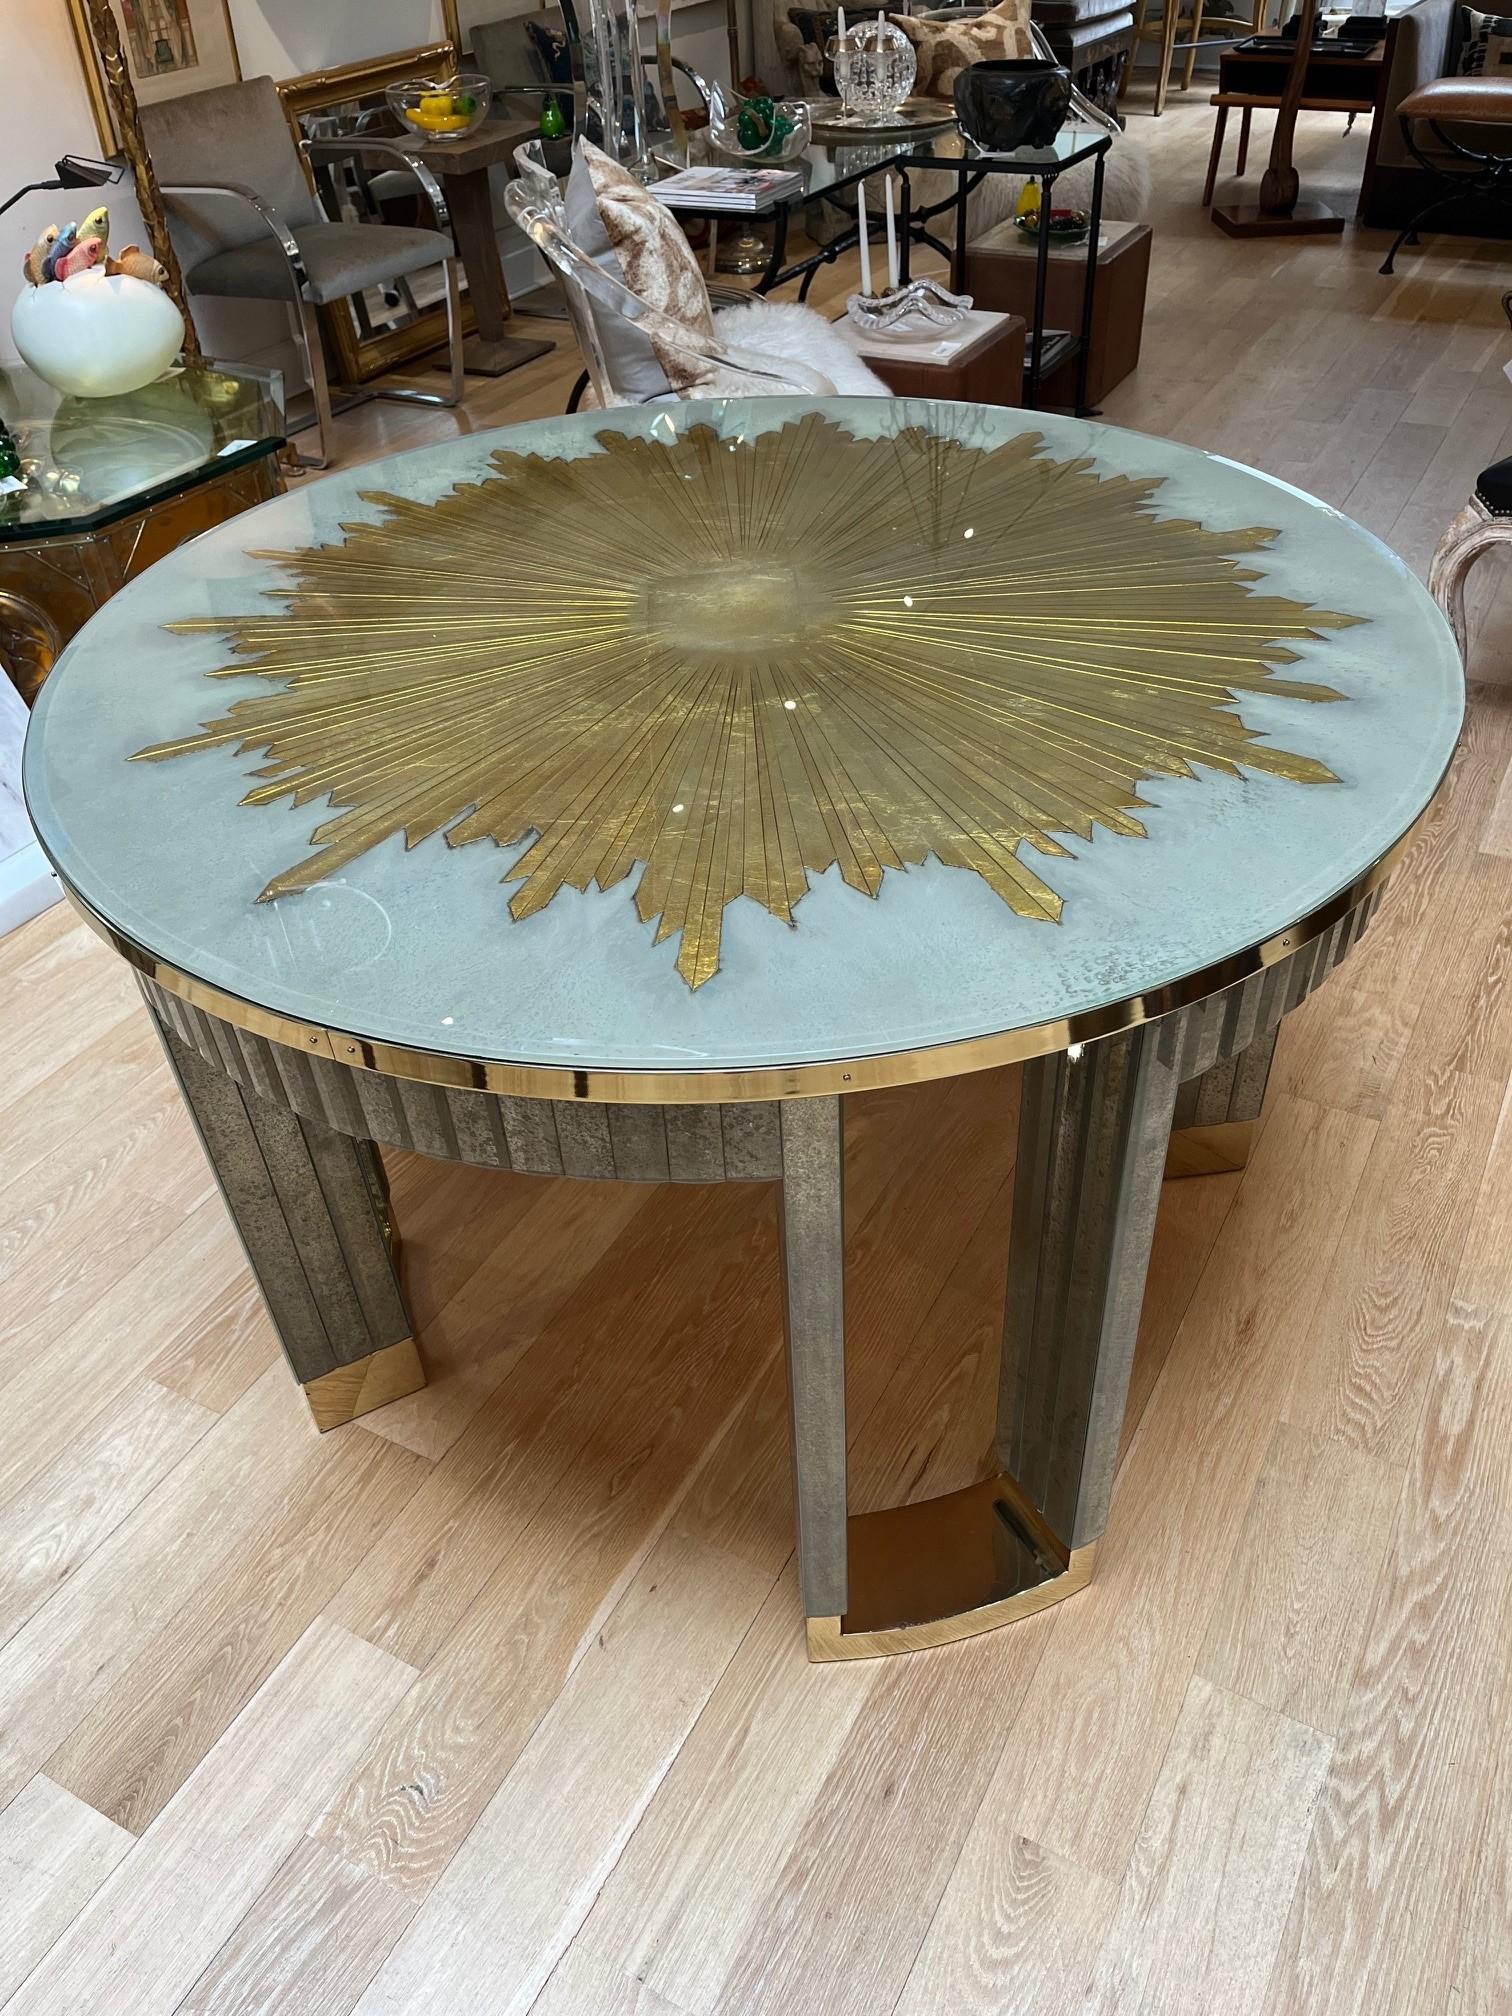 Picturesque Starburst Mirrored Center Table with Etched and Gilded Starburst Beveled and Removable Top with Inlaid Wooden Top Beneath, This a Showroom Model